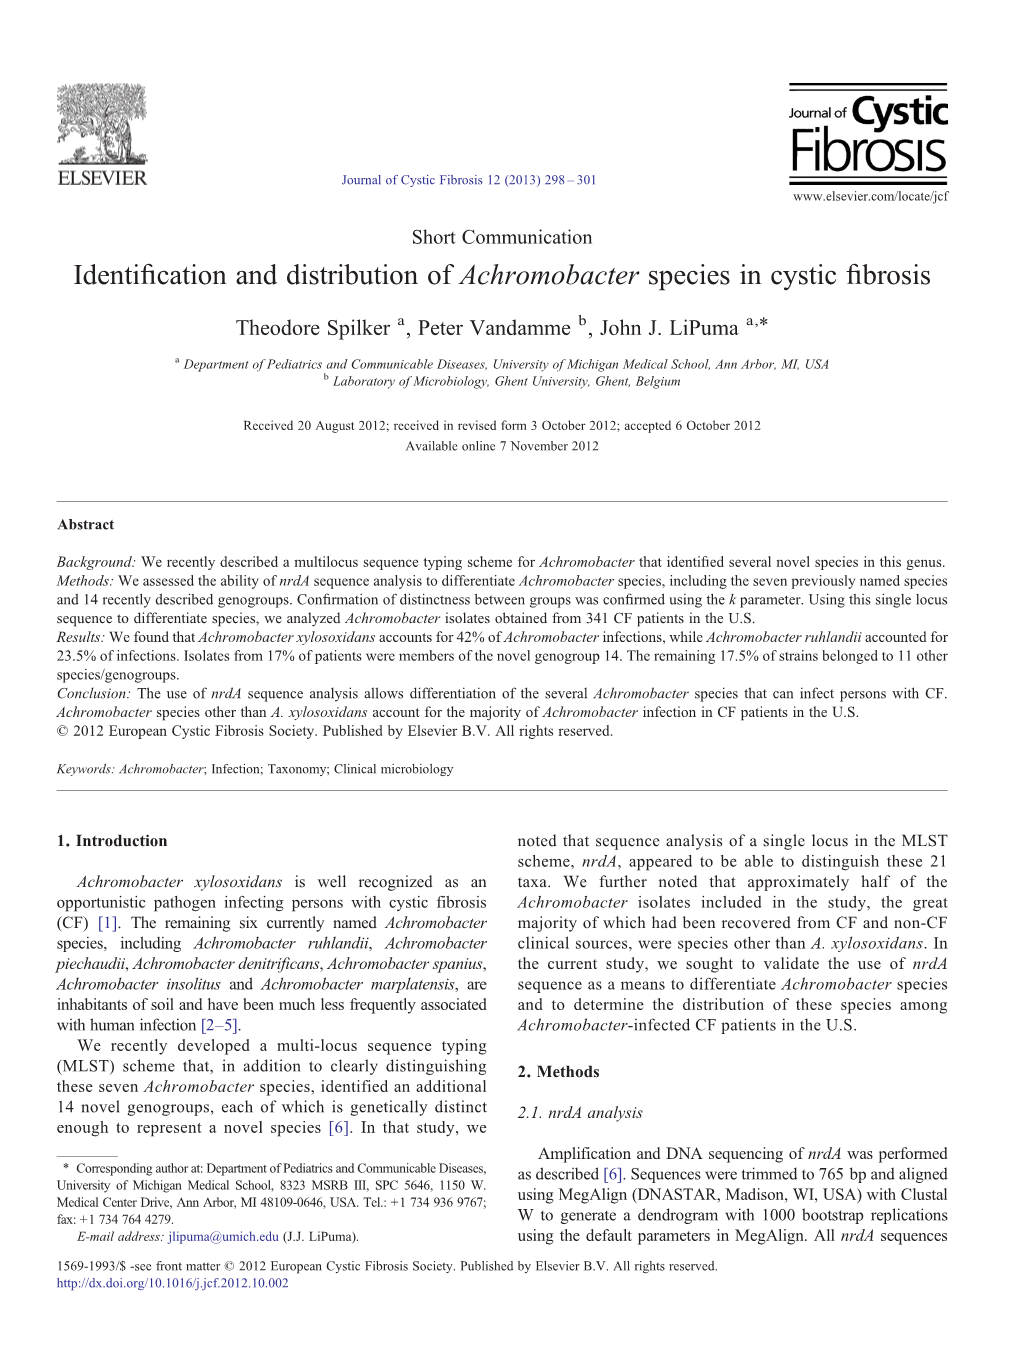 Identification and Distribution of Achromobacter Species in Cystic